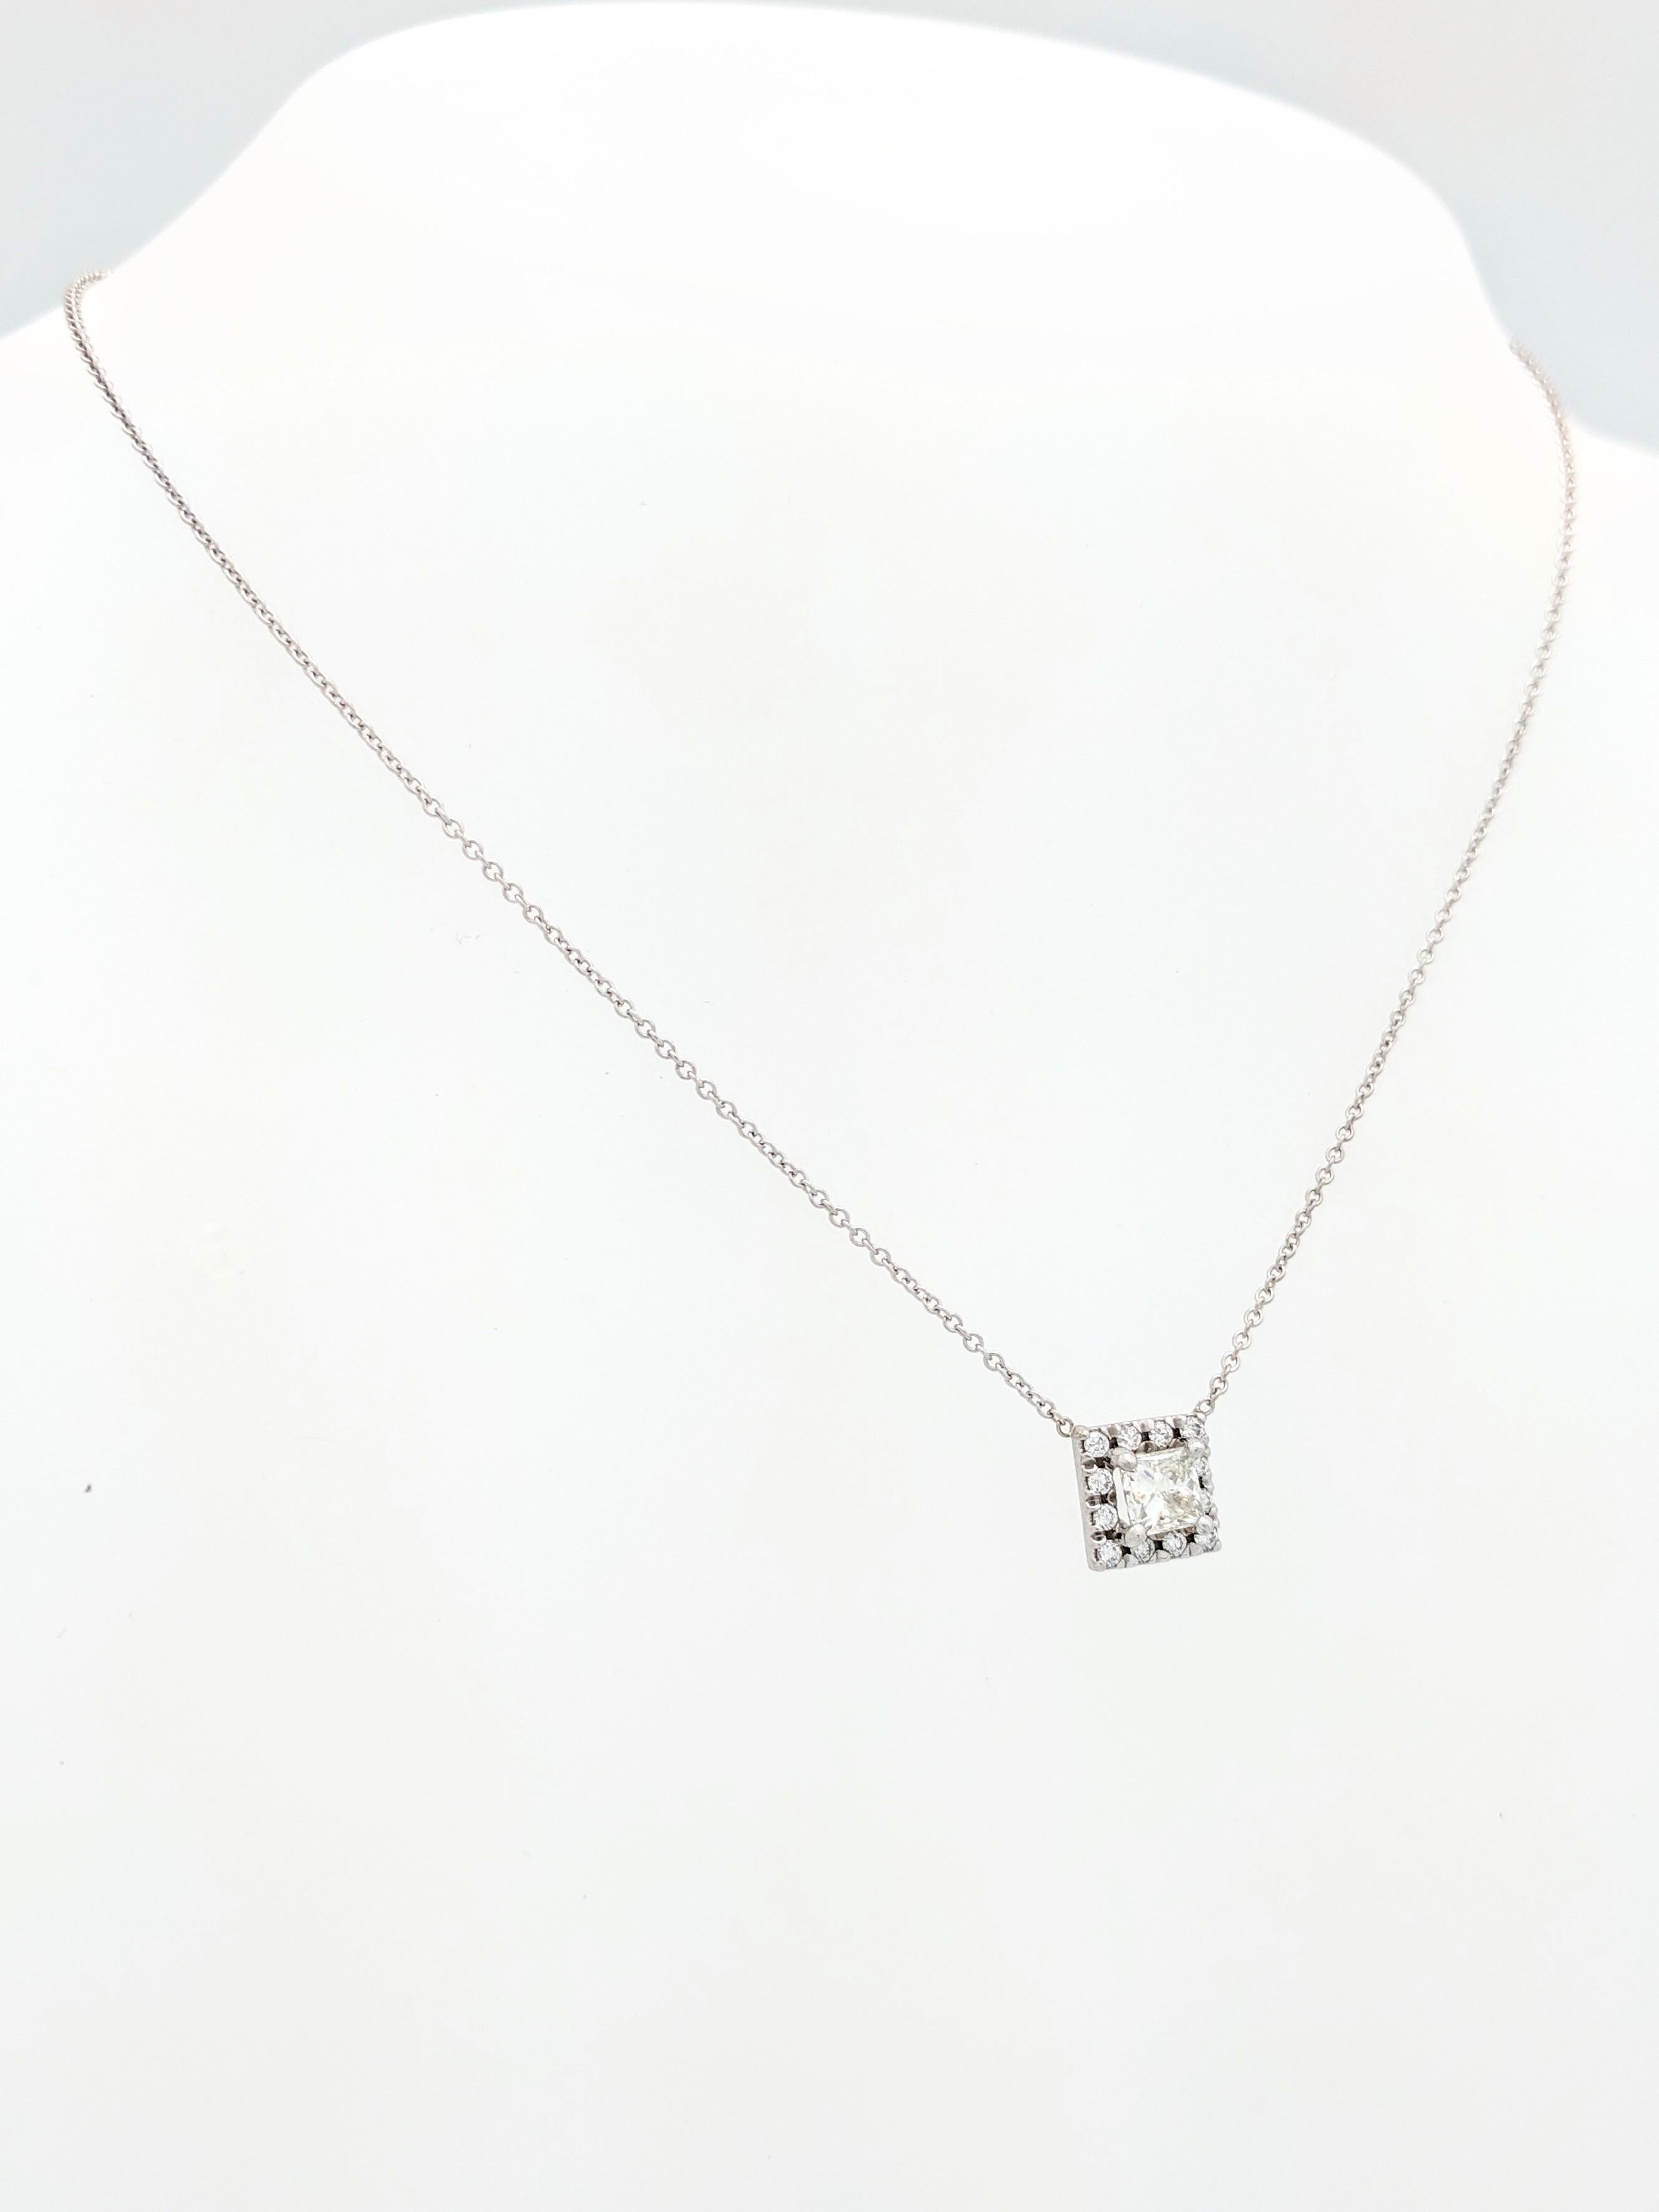 14K White Gold .57ct Princess Cut Diamond Square Halo Pendant Necklace

You are viewing a beautiful princess cut squared halo diamond pendant necklace.

This pendant is crafted from 14k white gold and weighs 2.3 grams. It features (1) .57ct natural